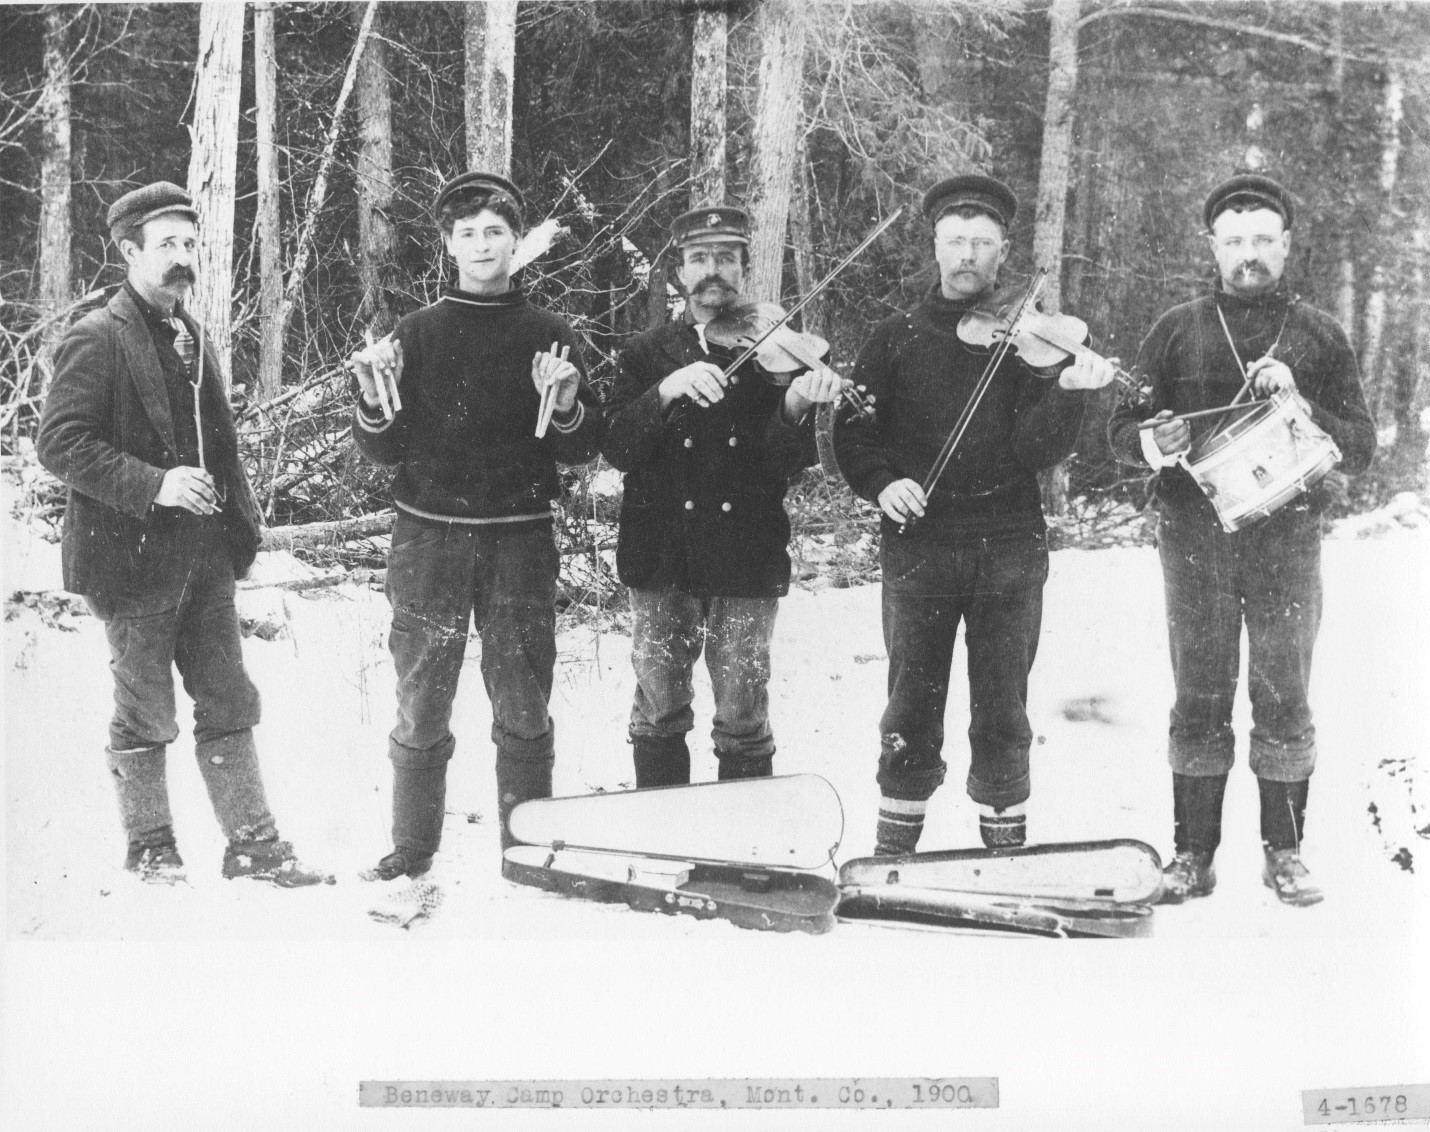 Photo of the Beneway Camp Orchestra, Montmorency County, MI, 1900